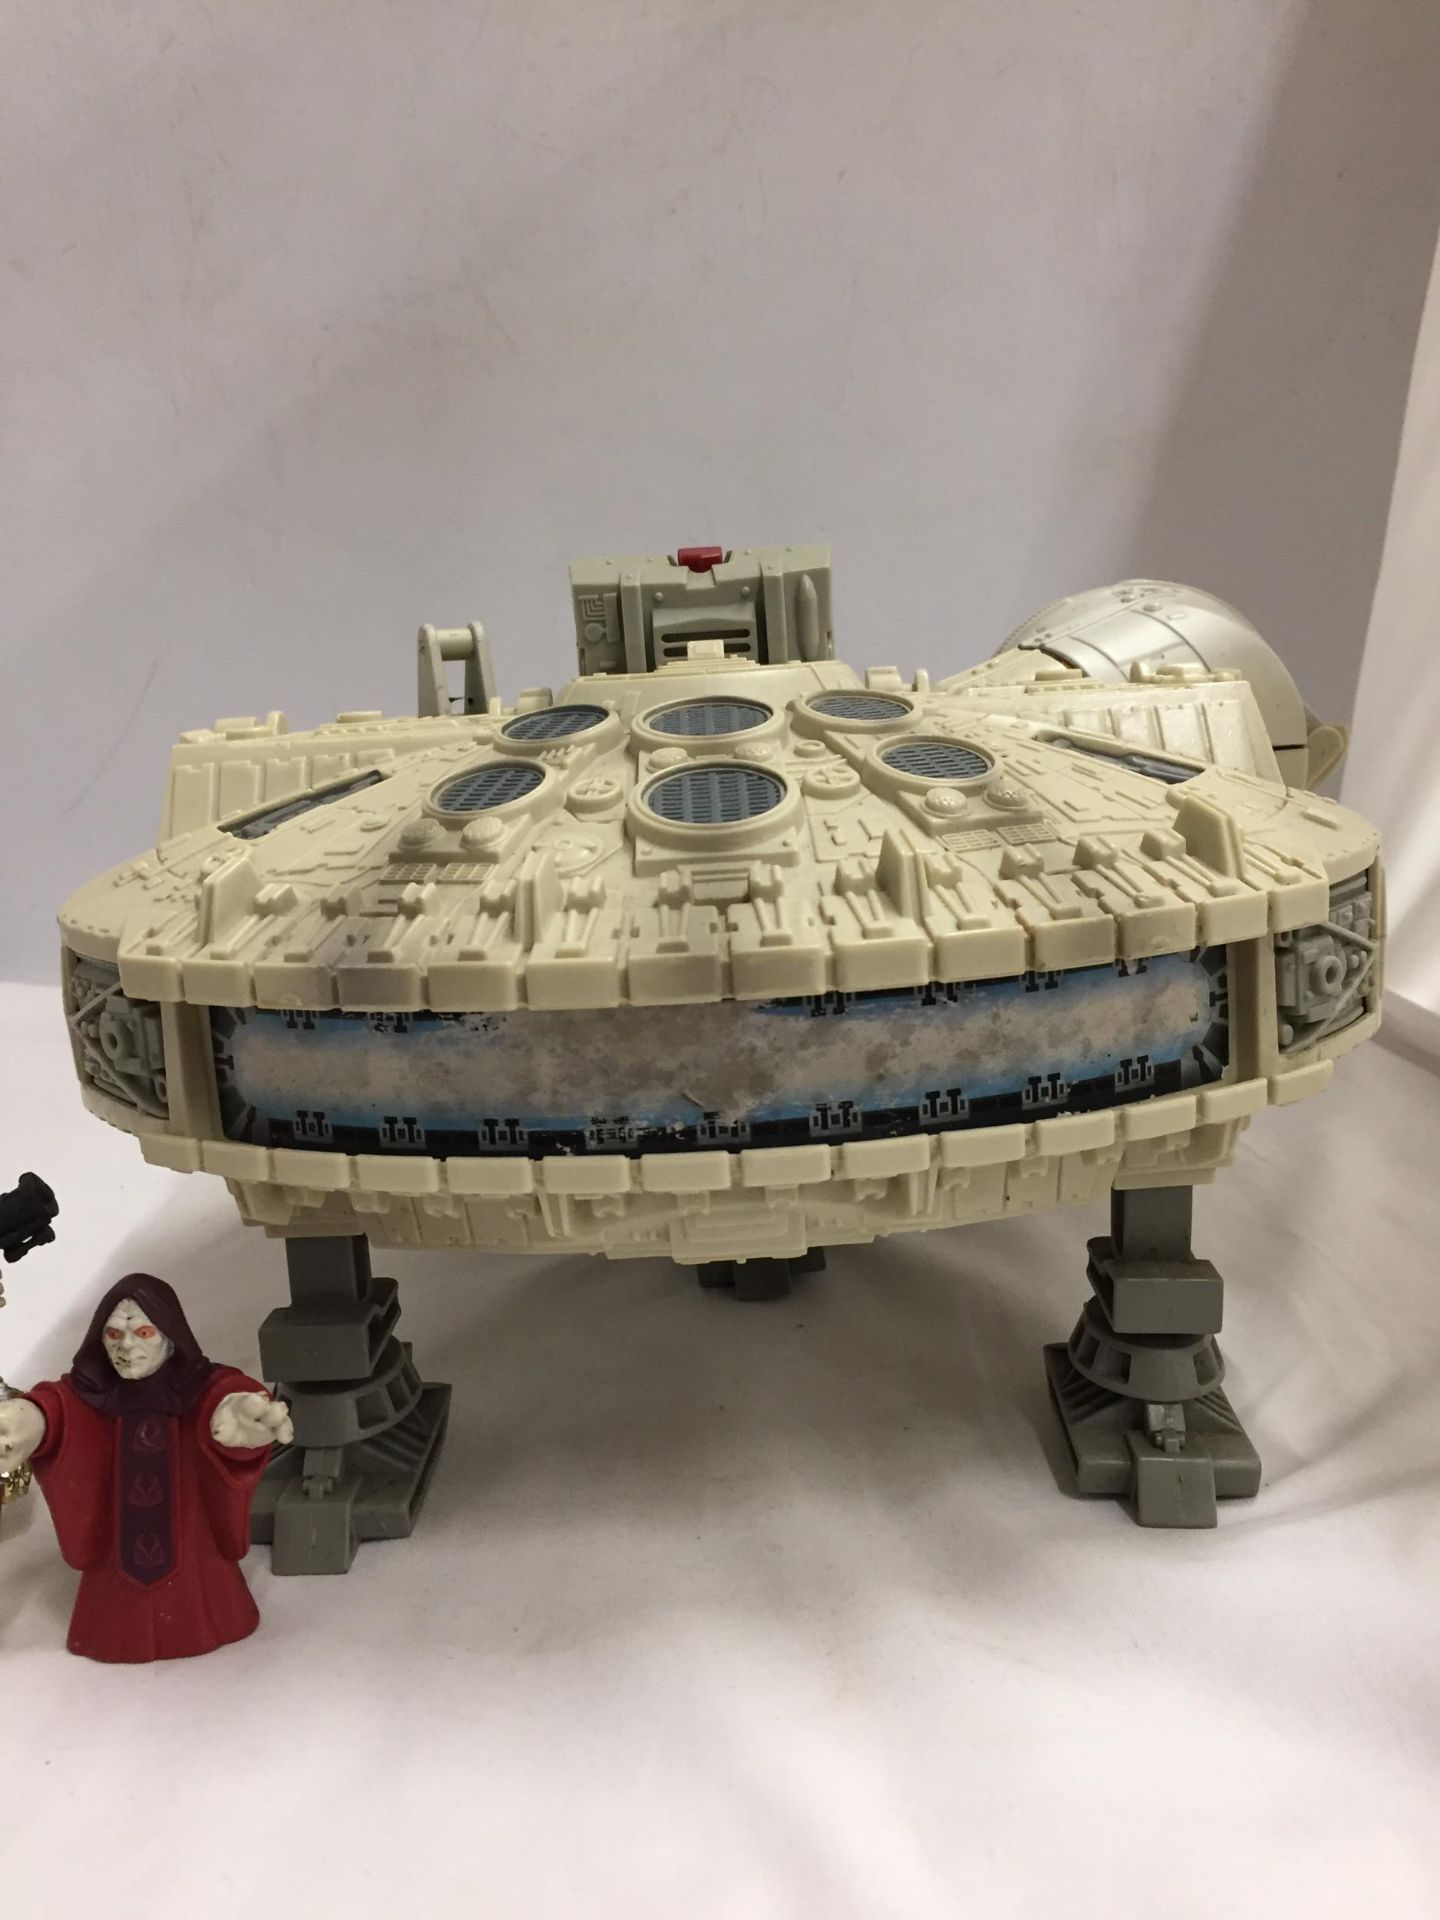 A STAR WARS MILLENIUM FALCON SPACE SHIP WITH FOUR FIGURES - Image 2 of 3